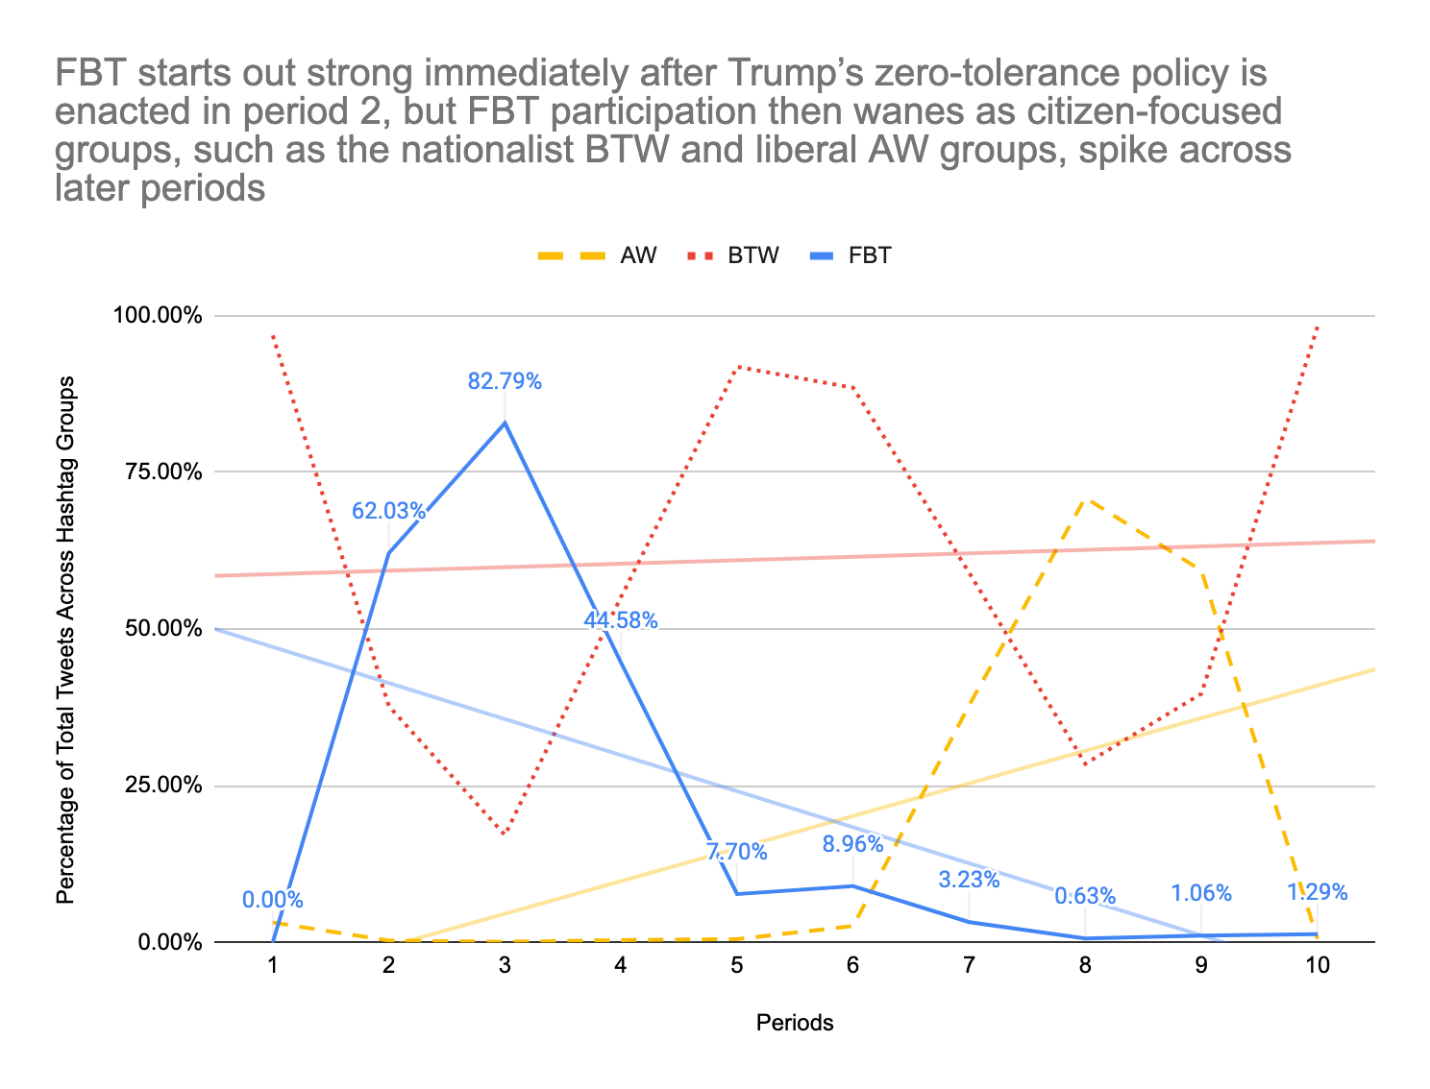 Temporal line chart indicating percentage of total tweets across all hashtag group per period. Trendlines highlight linear progression over time. FBT starts out strong (periods 2-4) immediately after Trump enacts his zero-tolerance policy, but FBT participation then wanes as citizen-focused groups, such as nationalist BTW and liberal AW groups, spike across later periods (4-10).